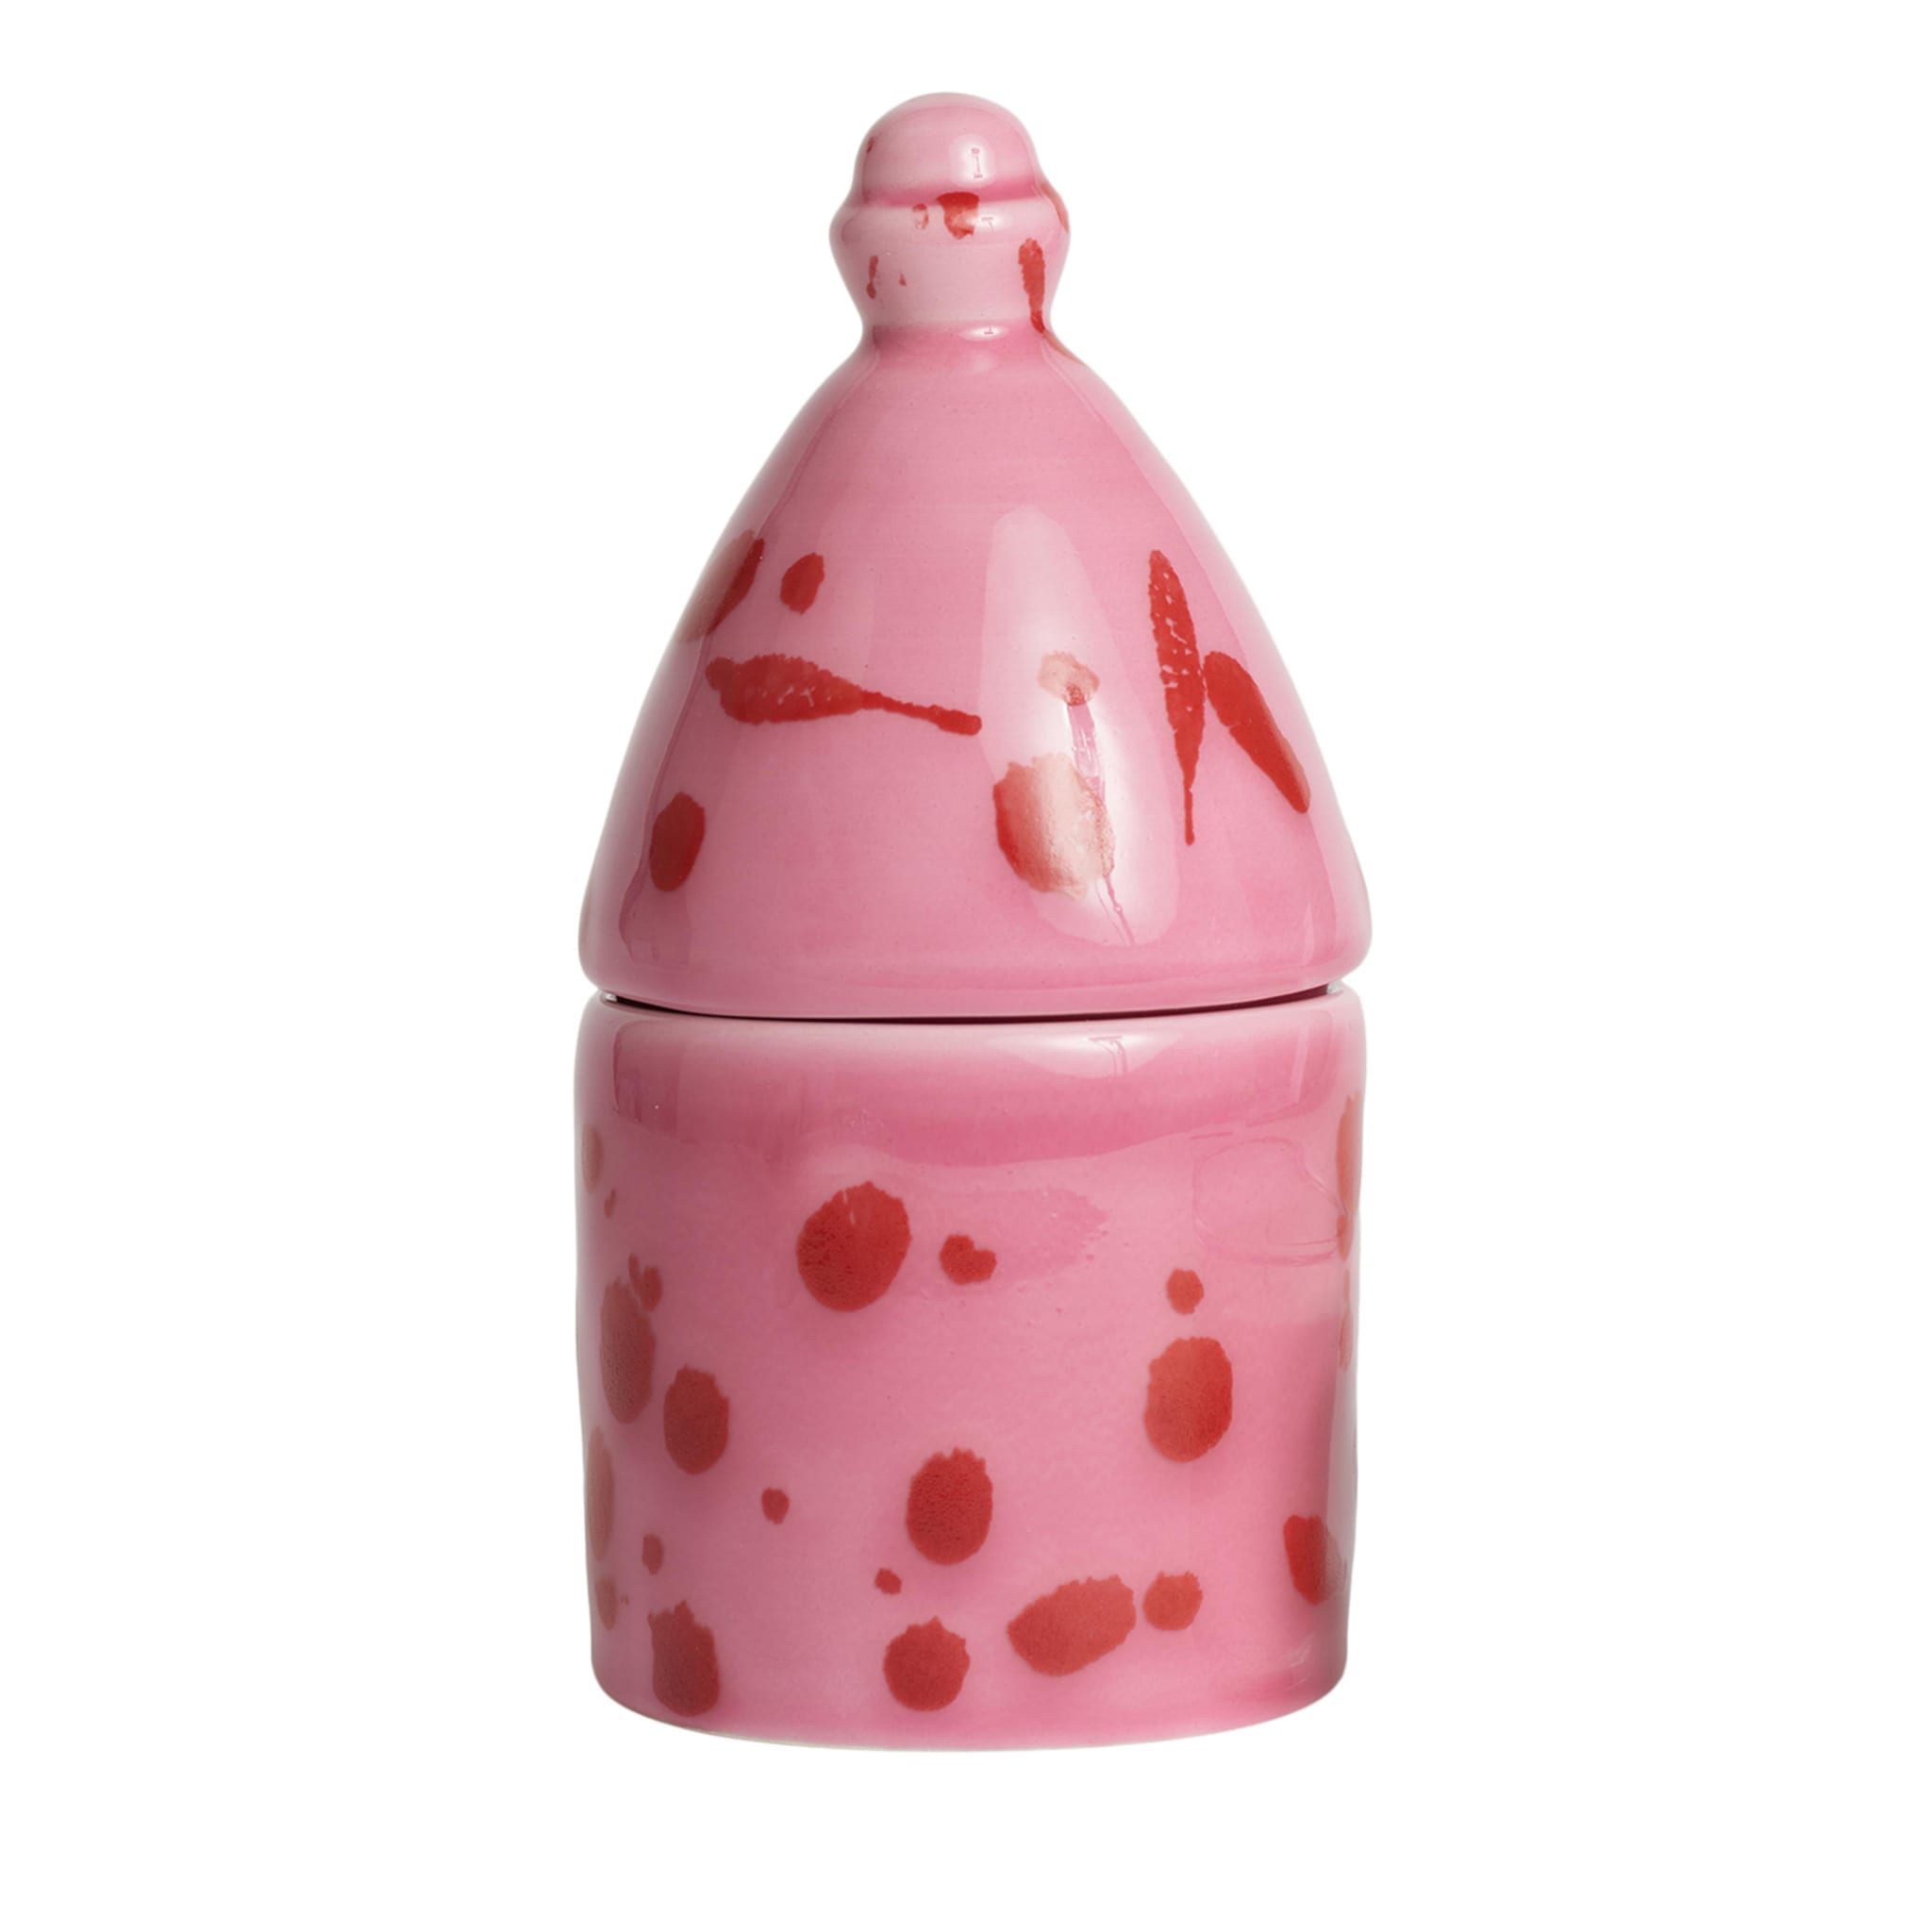 Trullo Pink and Red Candle Holder - Alternative view 1